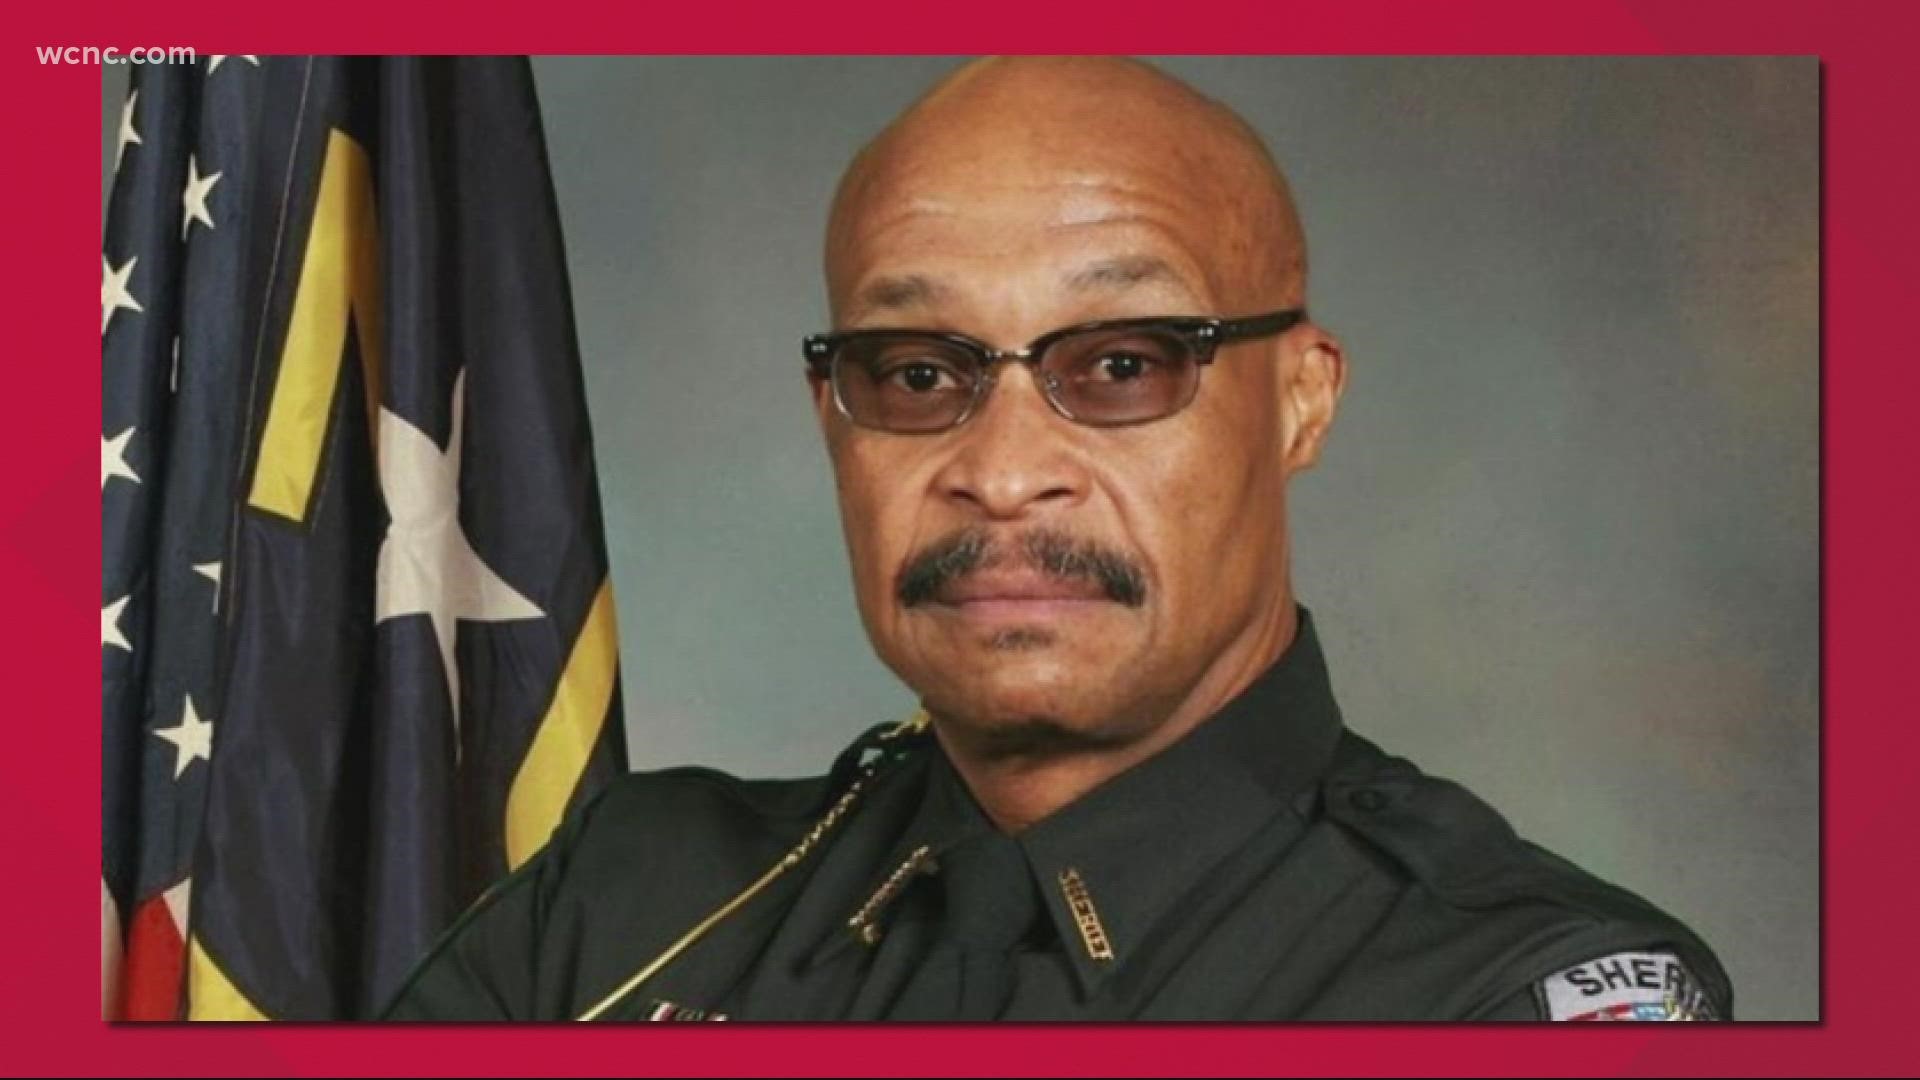 He had served as sheriff since 2002. He was the first person of color to be elected to that position in Richmond County.